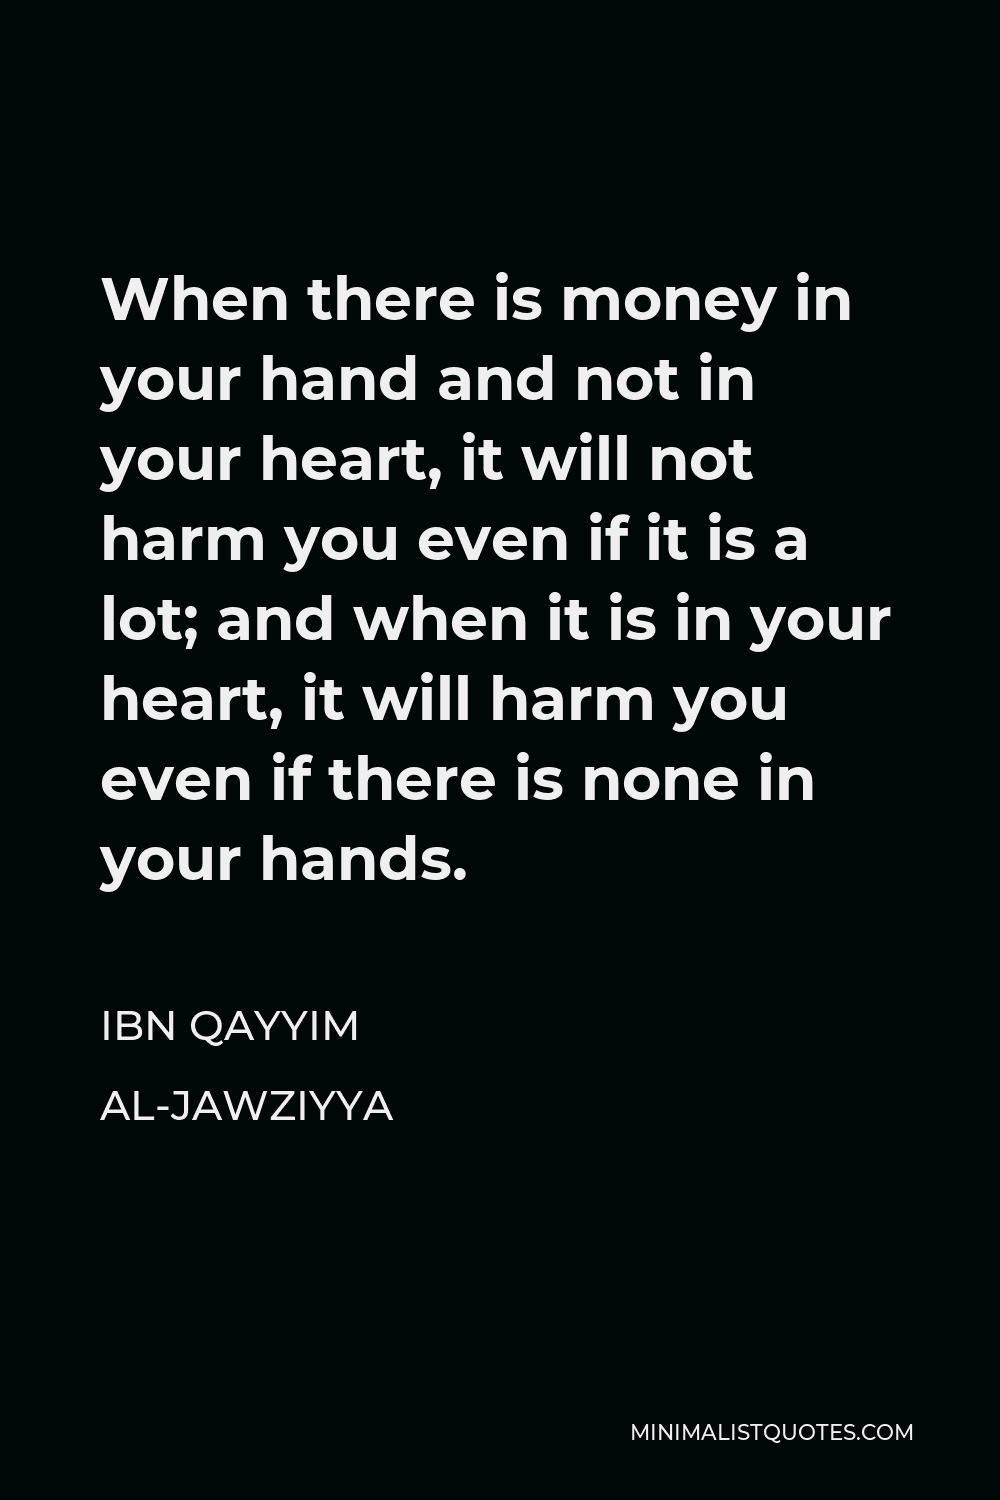 Ibn Qayyim Al-Jawziyya Quote - When there is money in your hand and not in your heart, it will not harm you even if it is a lot; and when it is in your heart, it will harm you even if there is none in your hands.